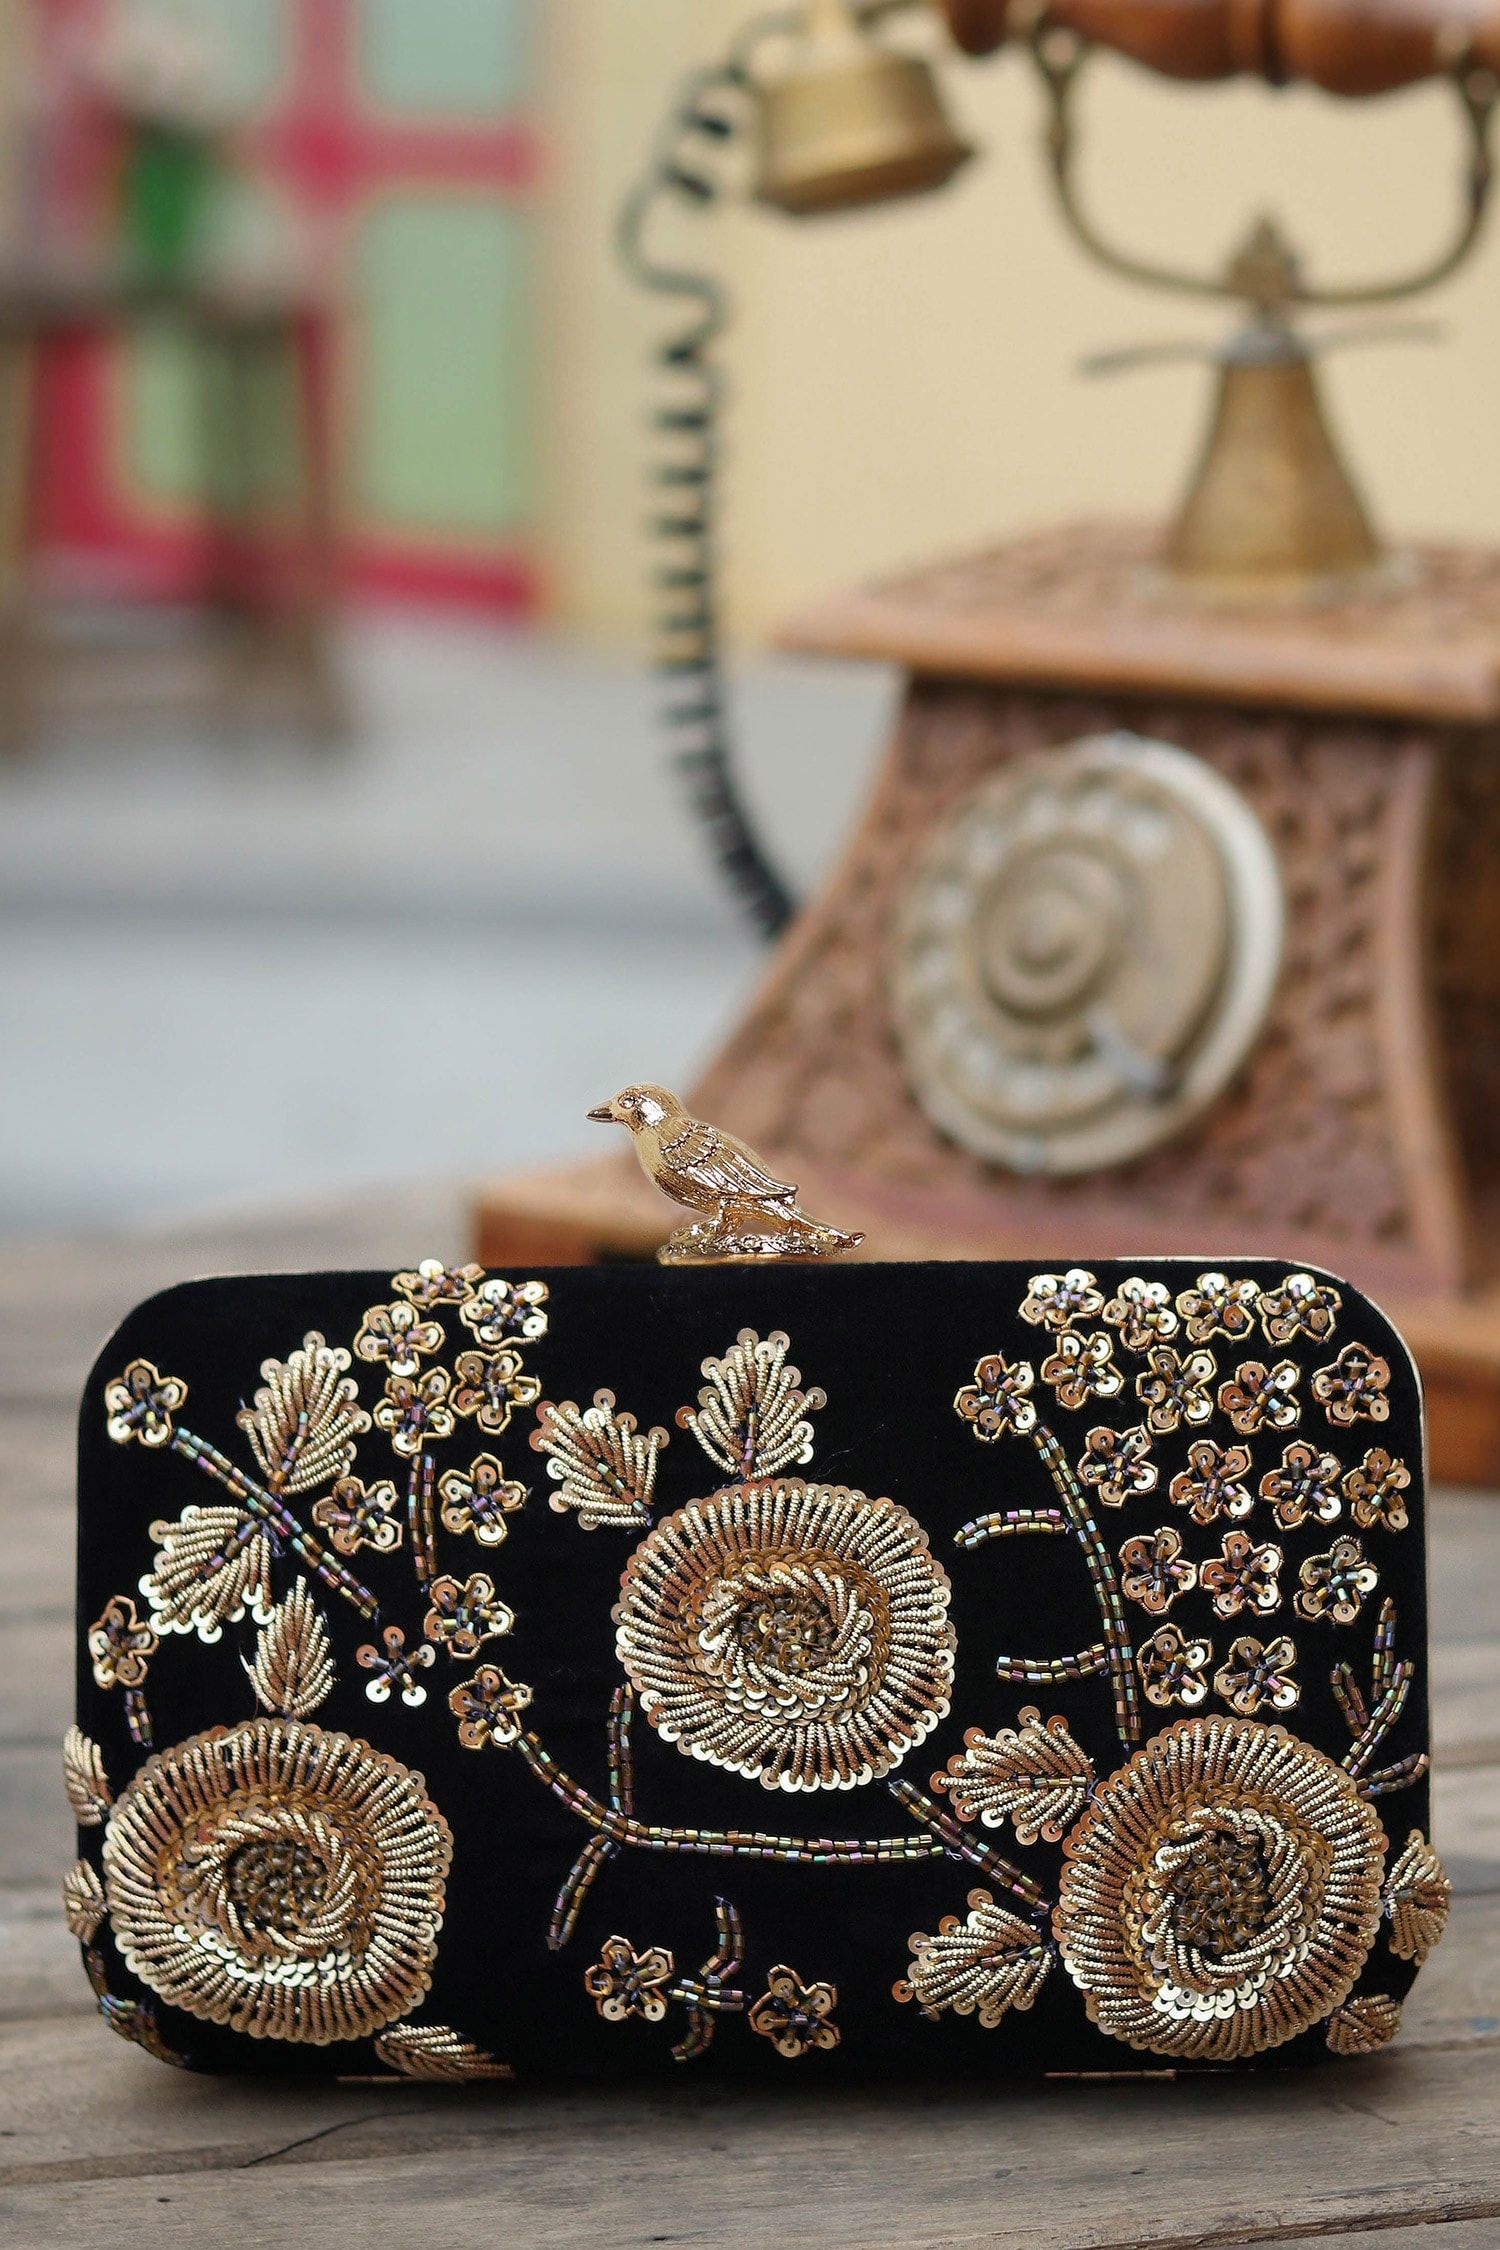 Embroideried Satin Clutch Bags